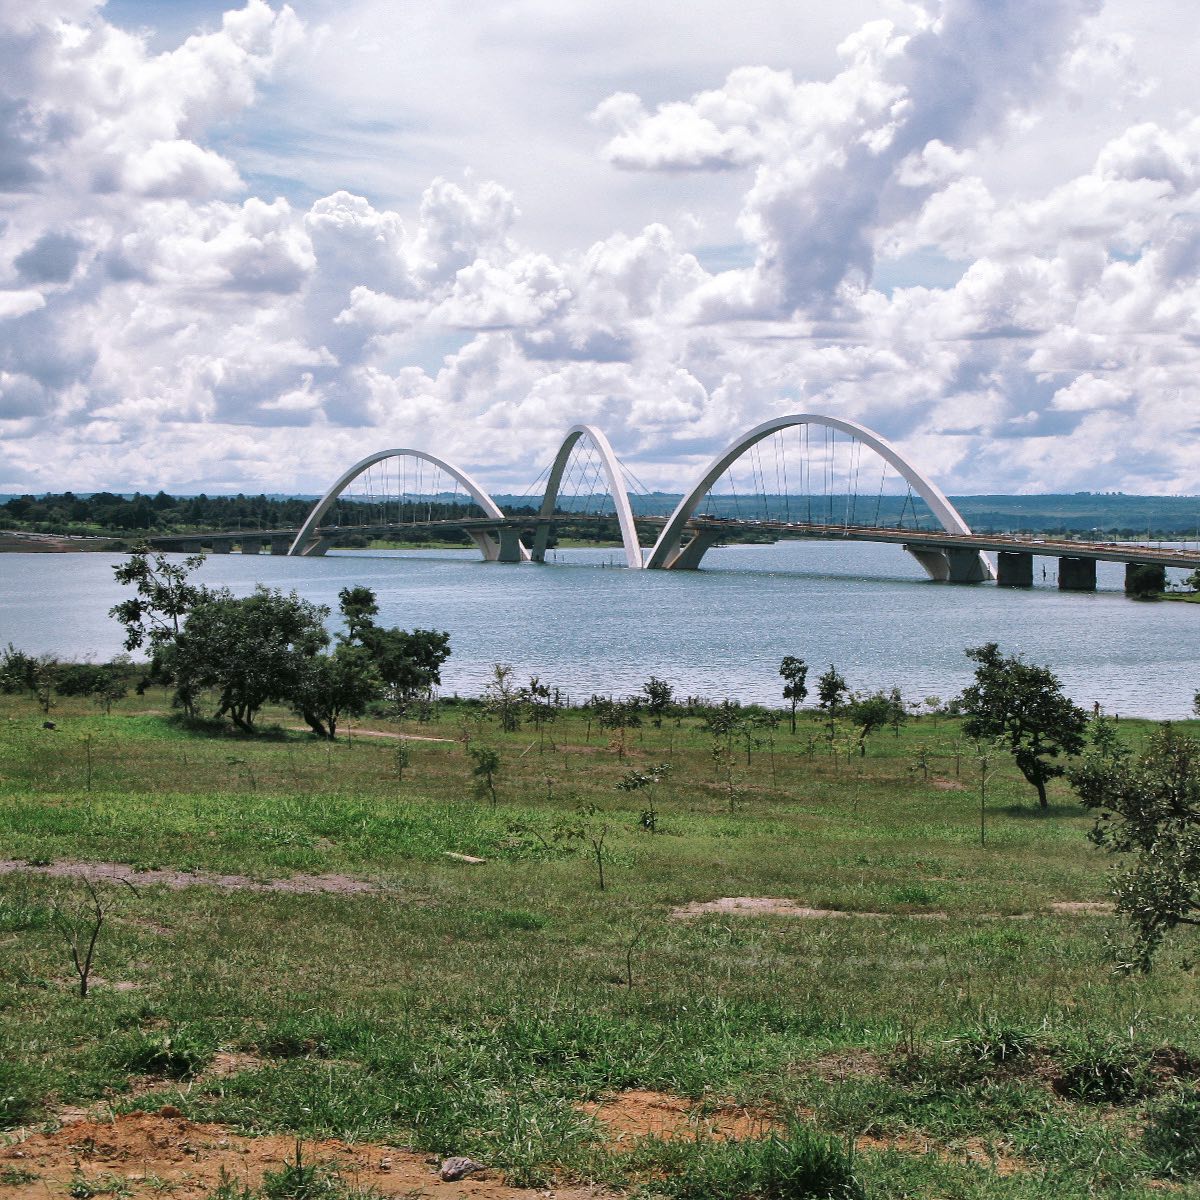 Juscelino Kubitschek Bridge is a steel and concrete arch bridge across Lake Paranoá in Brasília, Brazil. It connects the eastern shore of the lake – where Lago Sul, Paranoá and Brasília International Airport are located – to Brasília's city center, via the Monumental Axis. Opened to traffic on December 15, 2002, its distinctive silhouette quickly became a Brasília landmark.
📷 @alexiosvandoros 
_
_
#brazil #brasil #juscelinokubitschek #brasilia #visitbrazil #bridgearchitecture #instaarchitecture #picoftheday